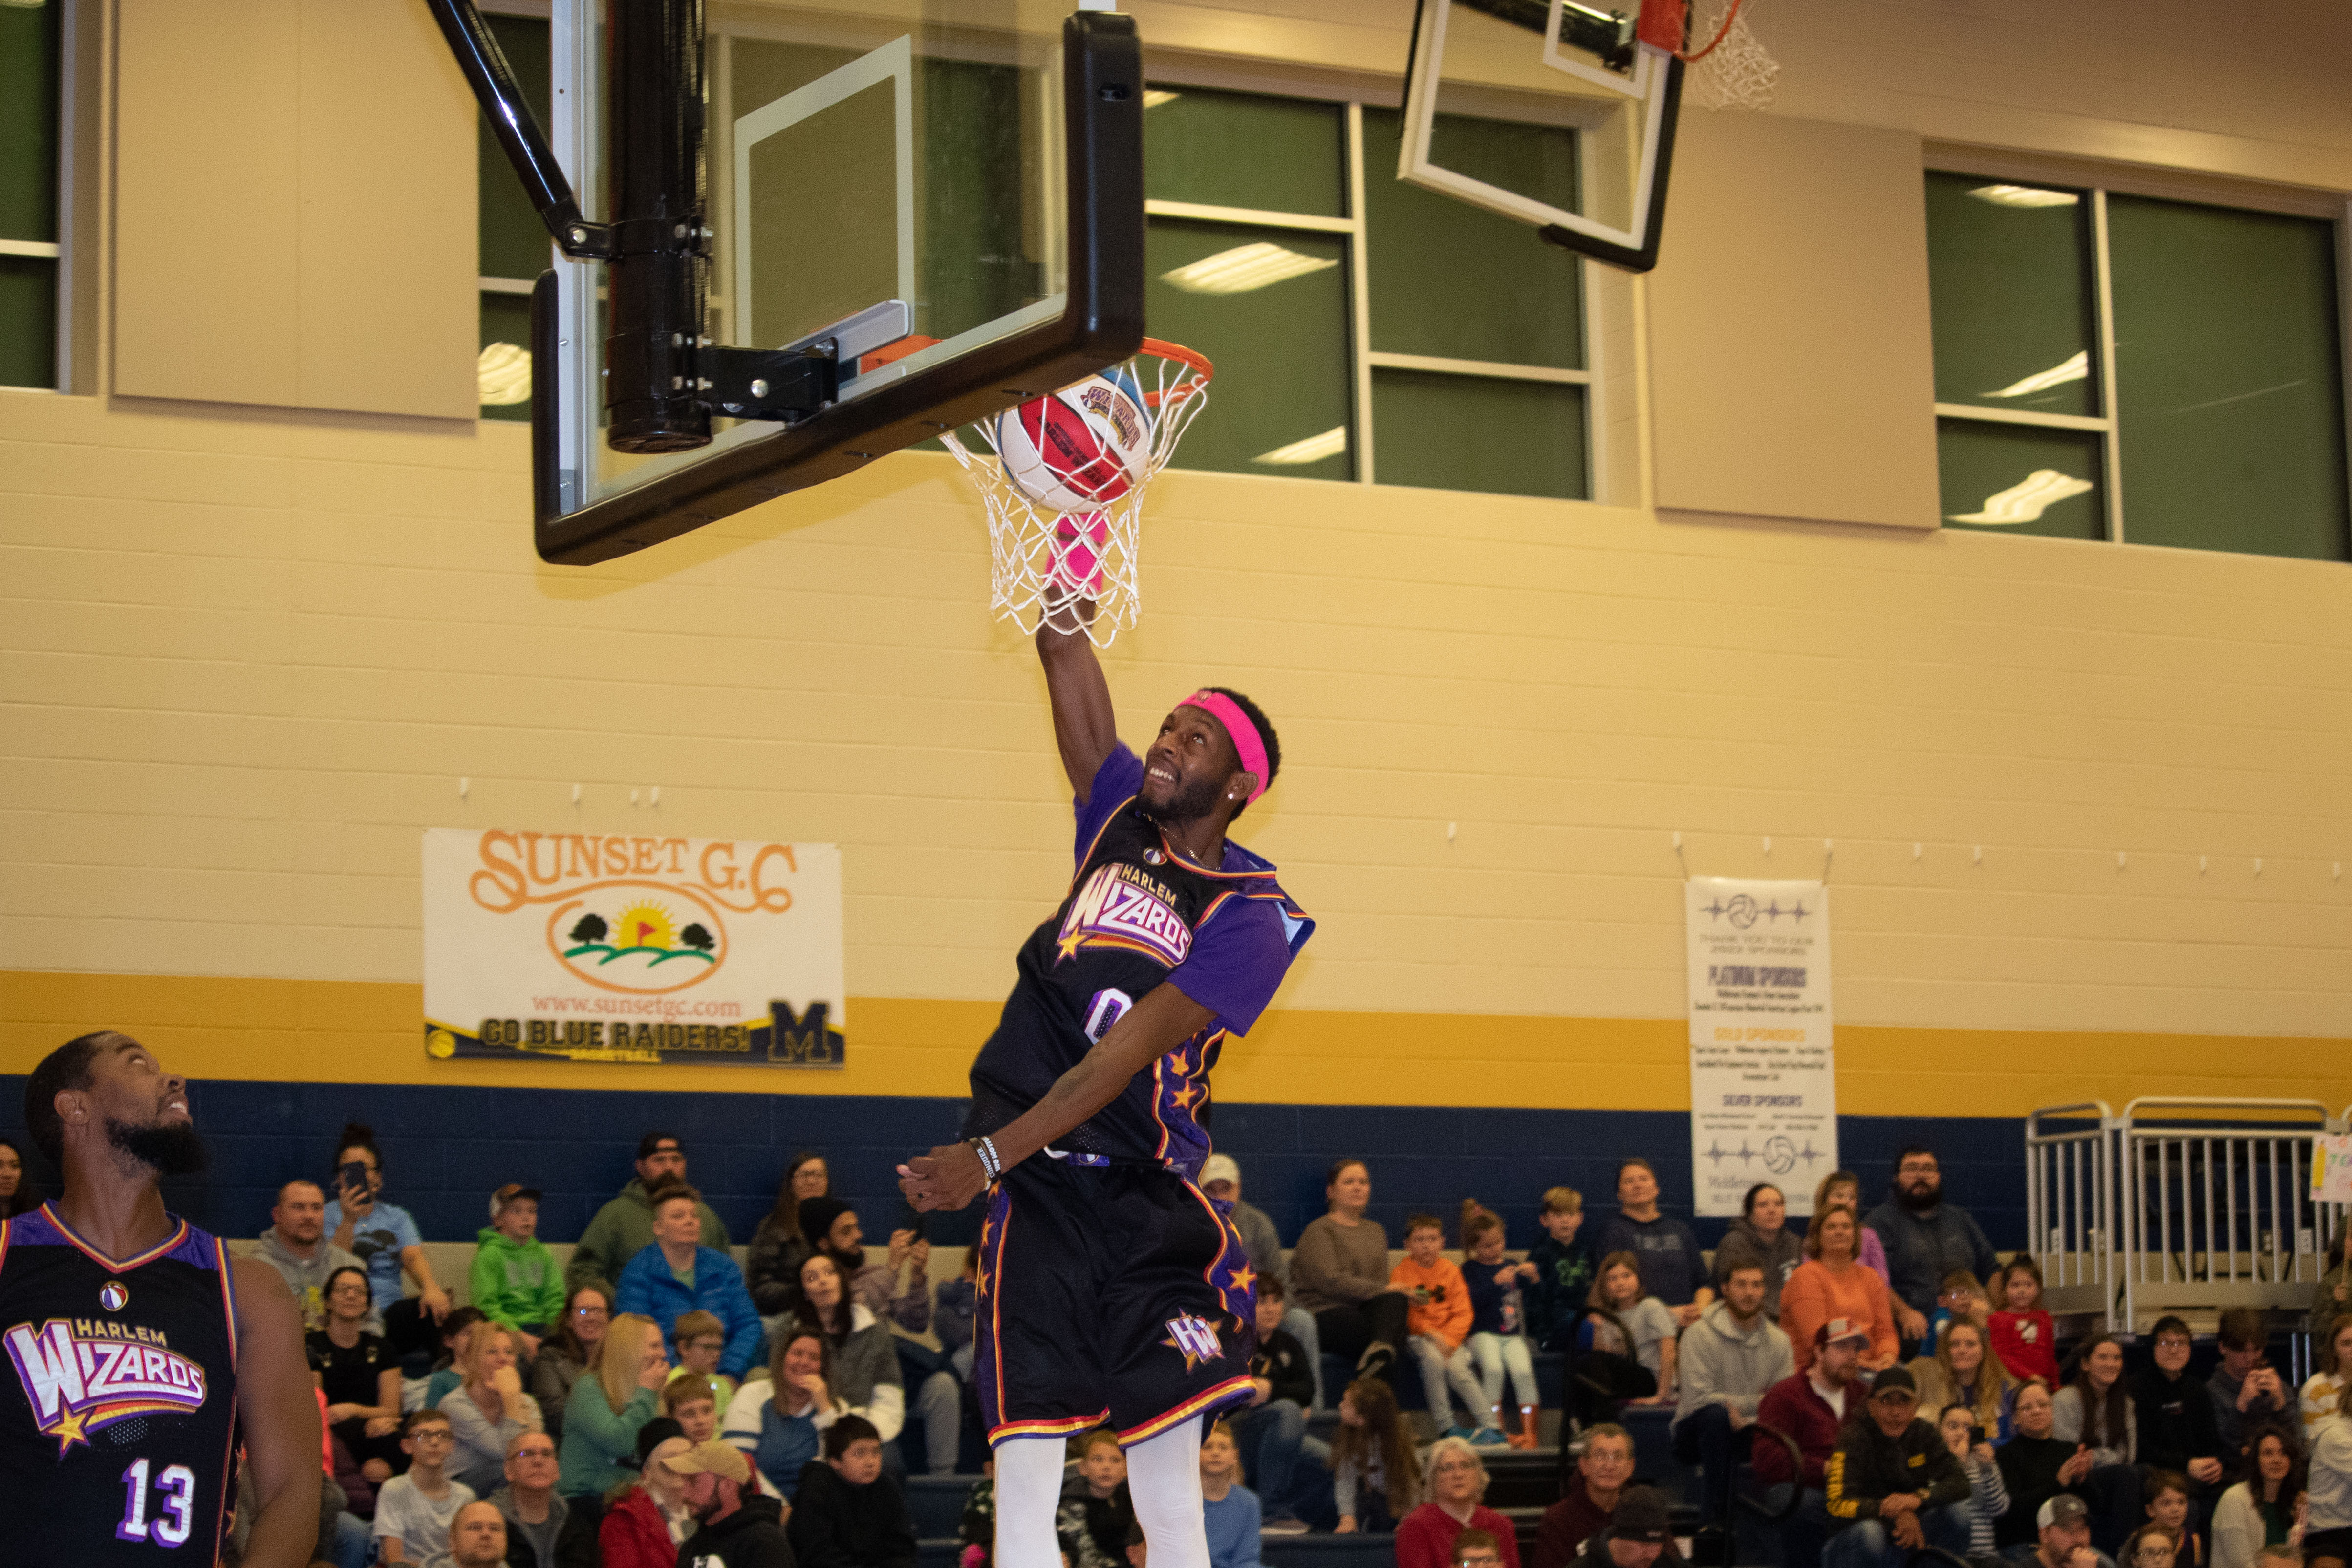 Harlem Wizards face-off in a basketball showdown against central